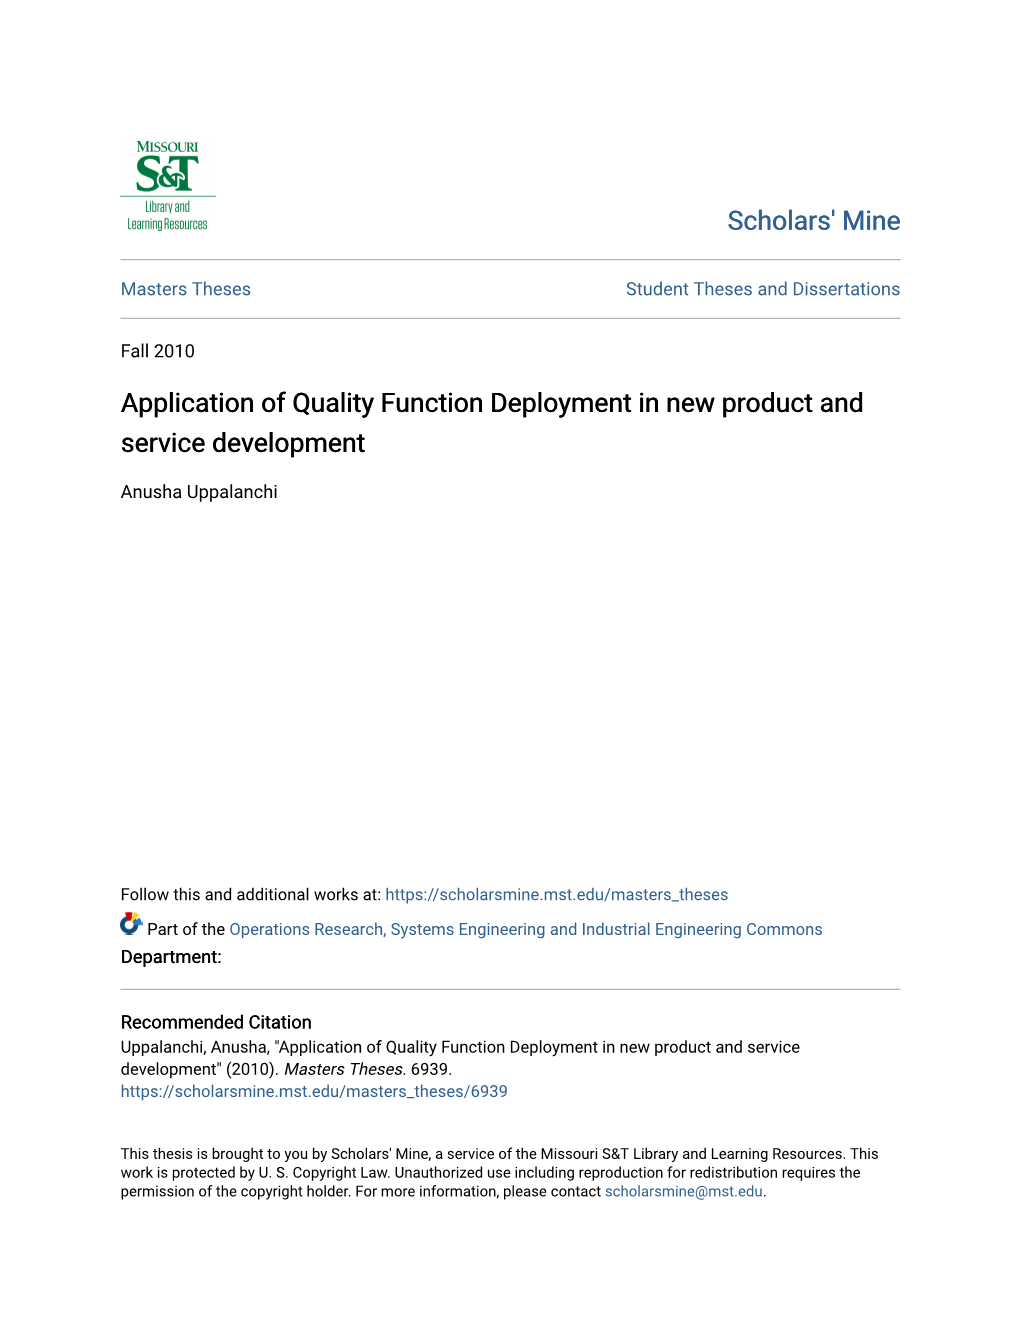 Application of Quality Function Deployment in New Product and Service Development